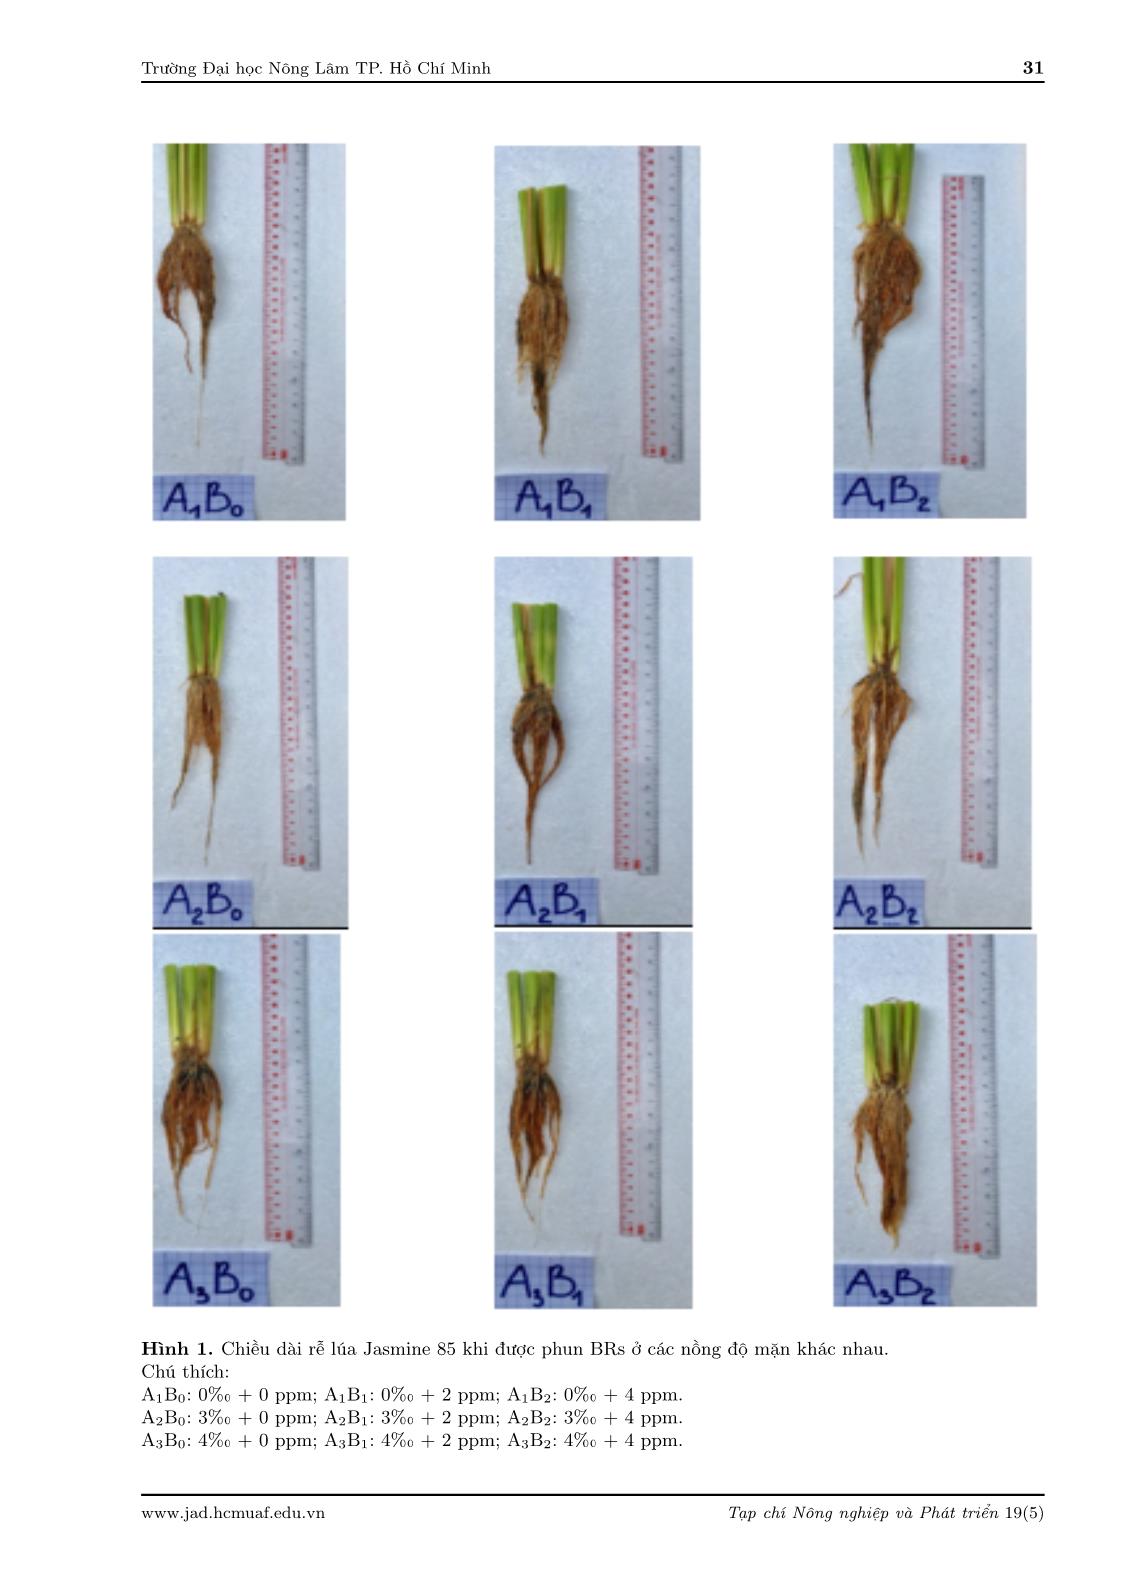 Effects of Brassinosteroid on growth, development, yield and activities of some antioxidant enzymes of Jasmine 85 rice cultivar under salinity conditions trang 5